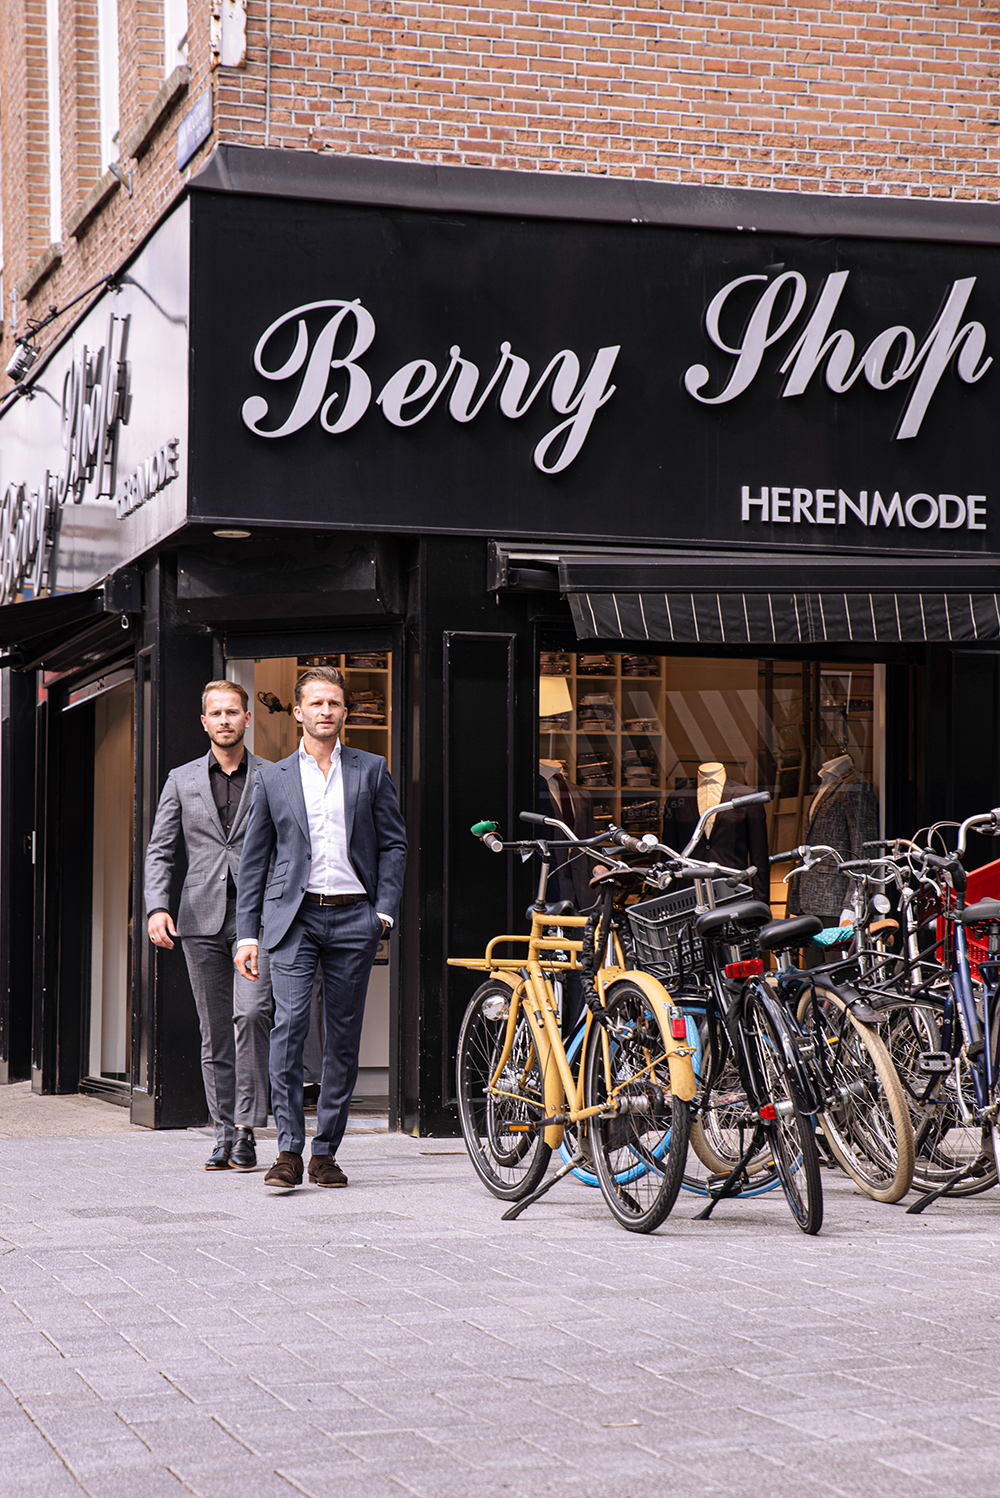 Photo and video production for Berry Shop by Dutch Fellow